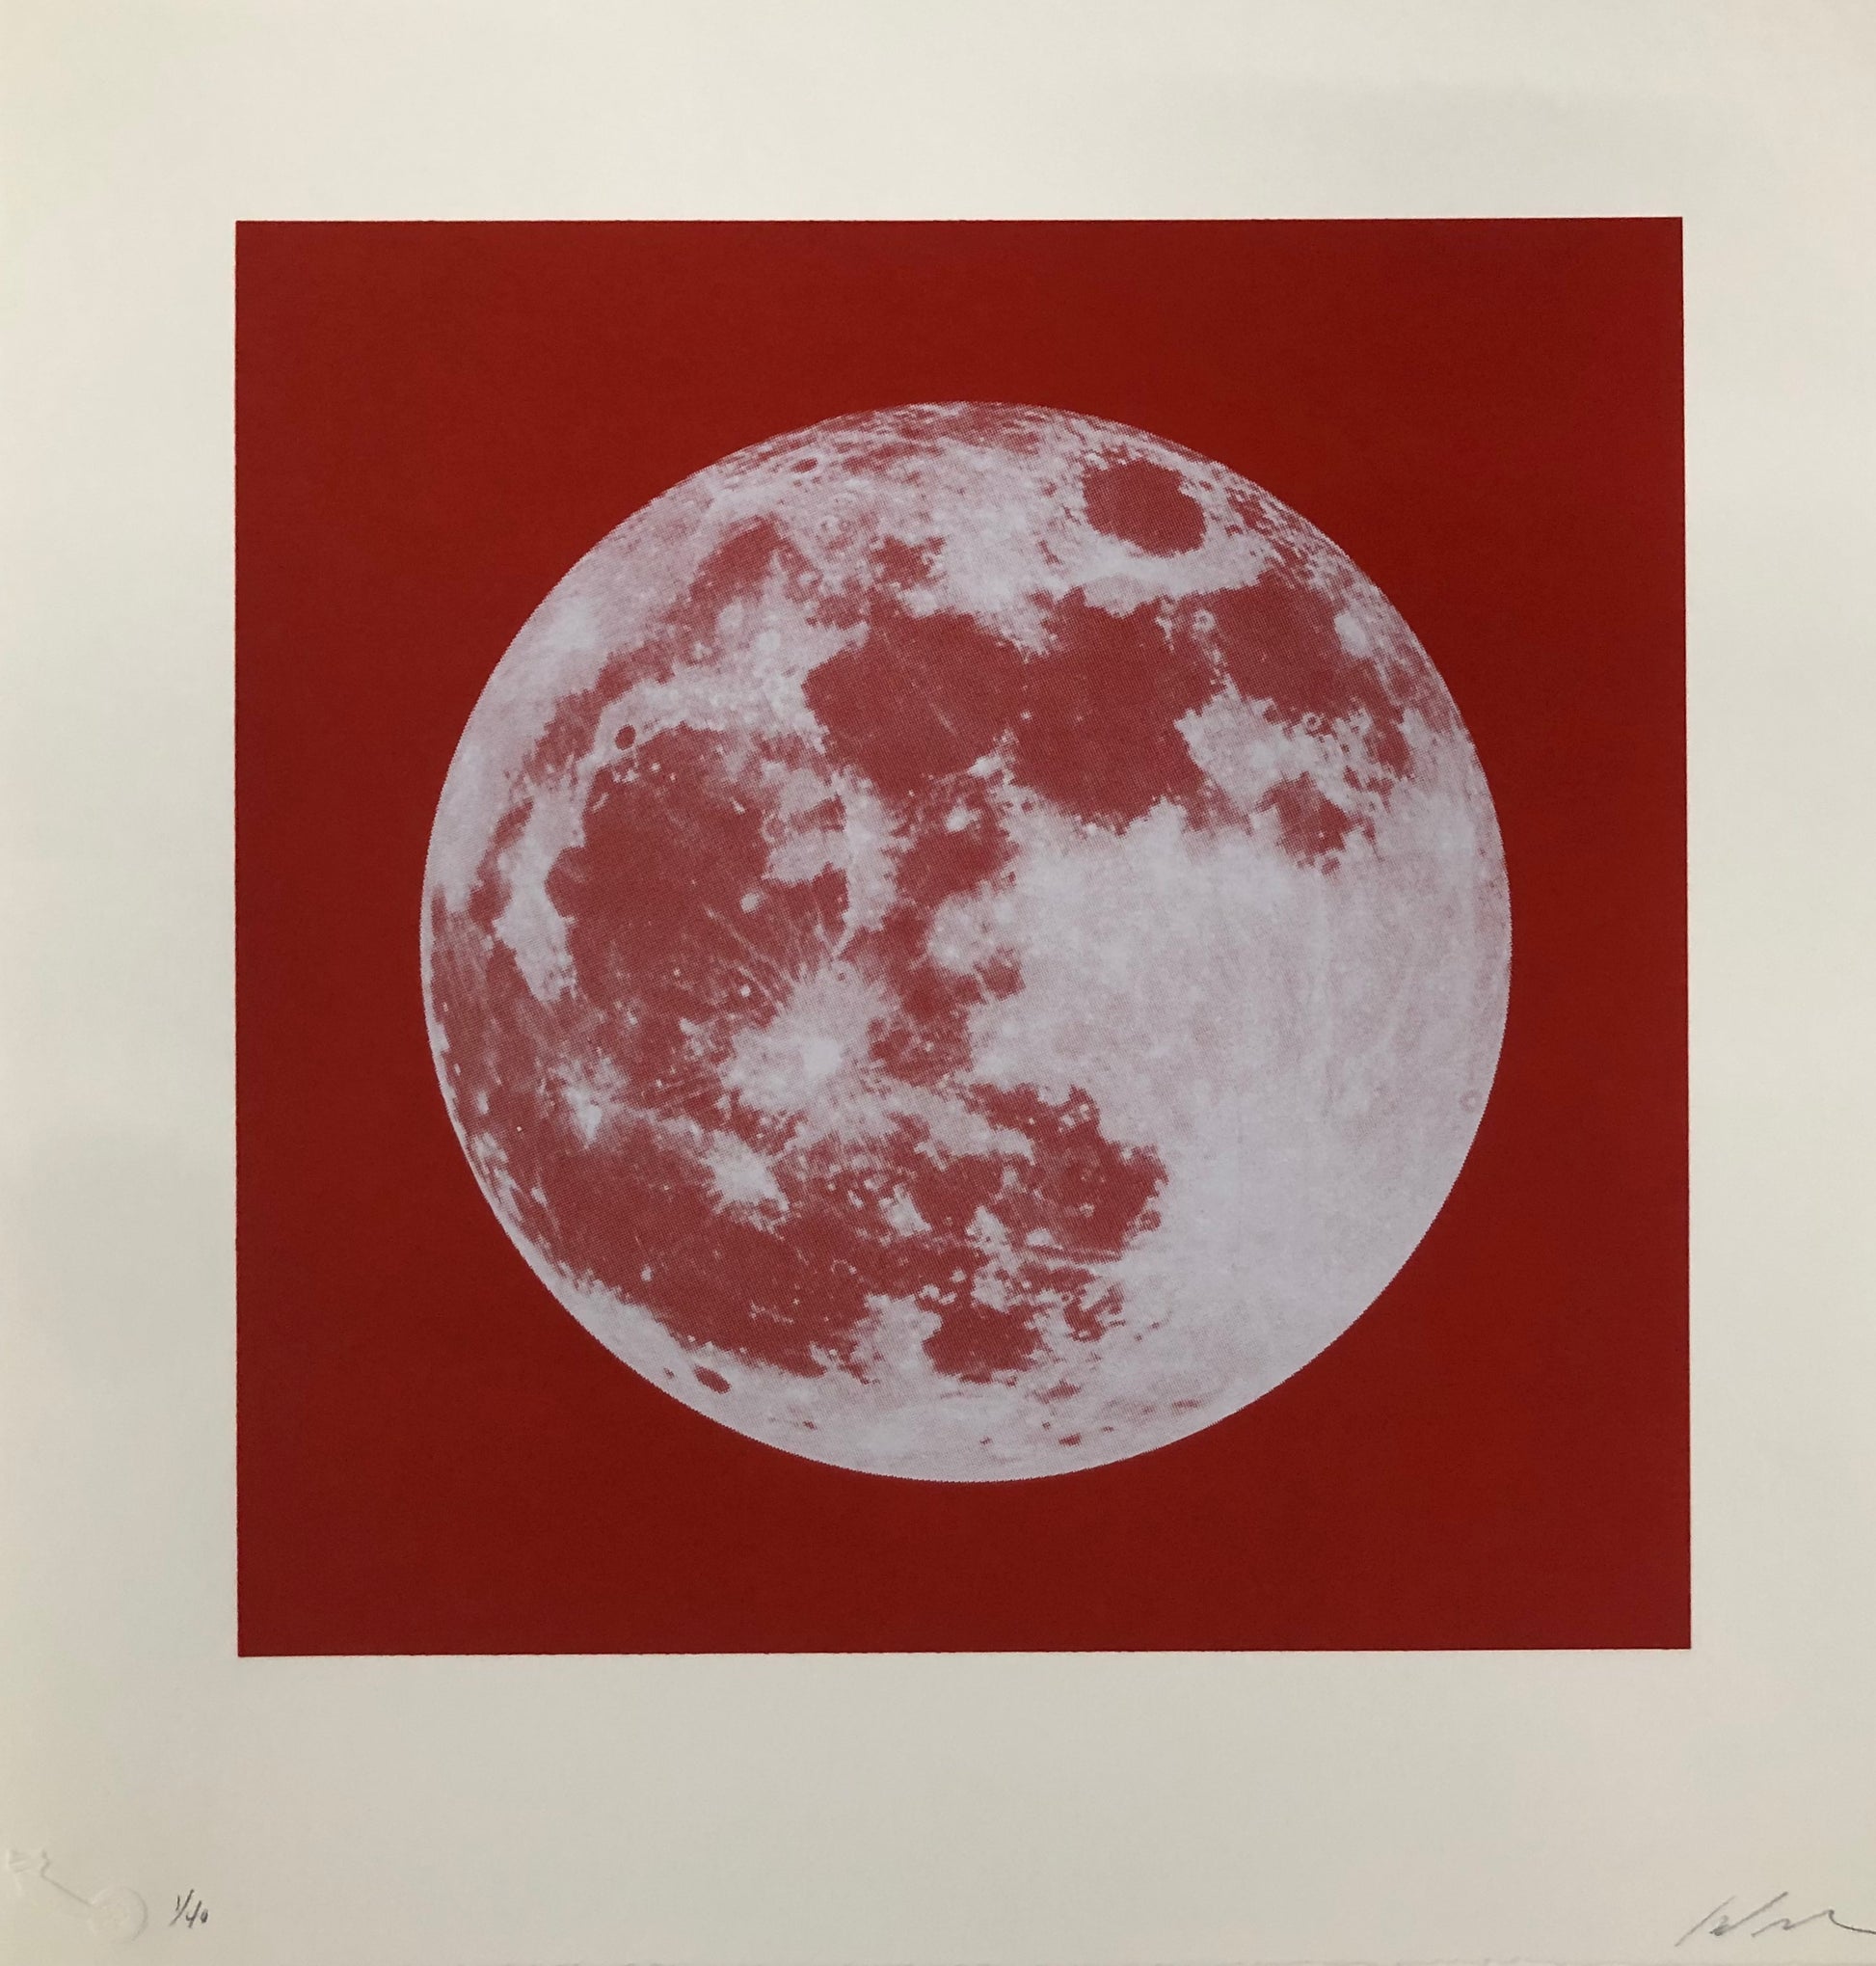 Moon Portraits - Full Moon - December 3, 2017 (Red) by Andy Gershon - Mourlot Editions - Fine_Art - Poster - Lithograph - Wall Art - Vintage - Prints - Original